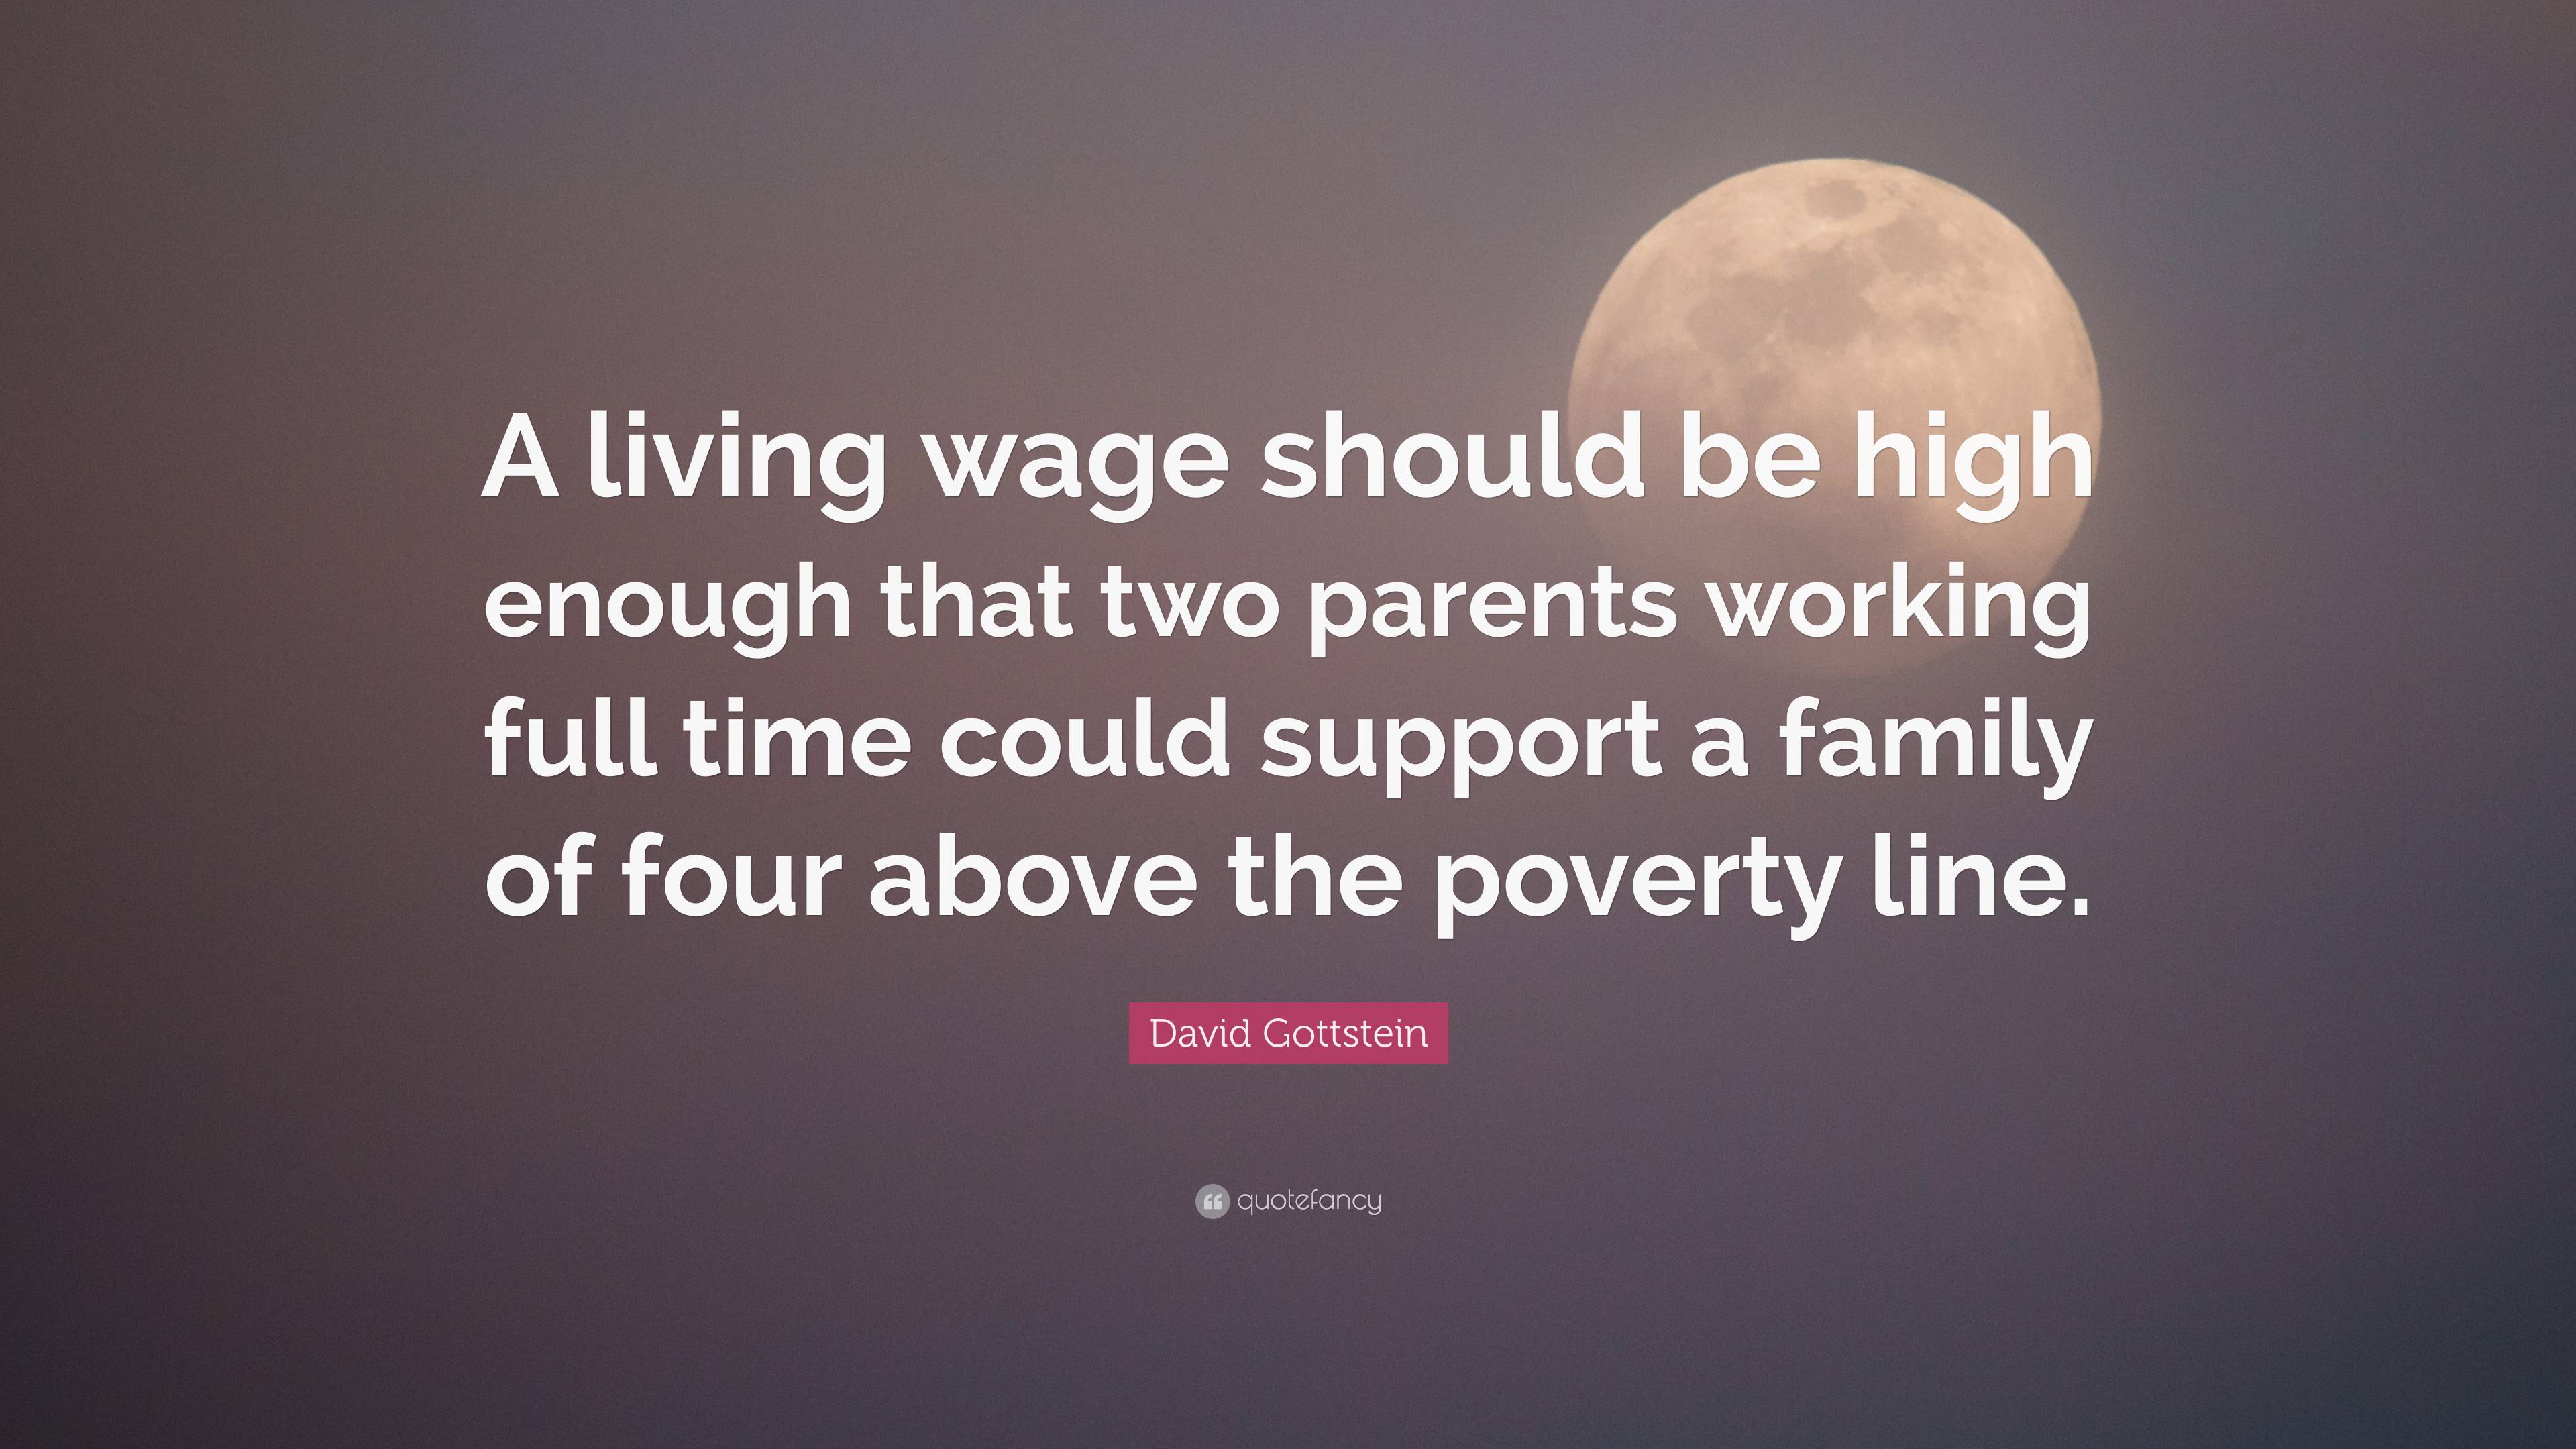 David Gottstein Quote: “A living wage should be high enough that two  parents working full time could support a family of four above the poverty  ...”